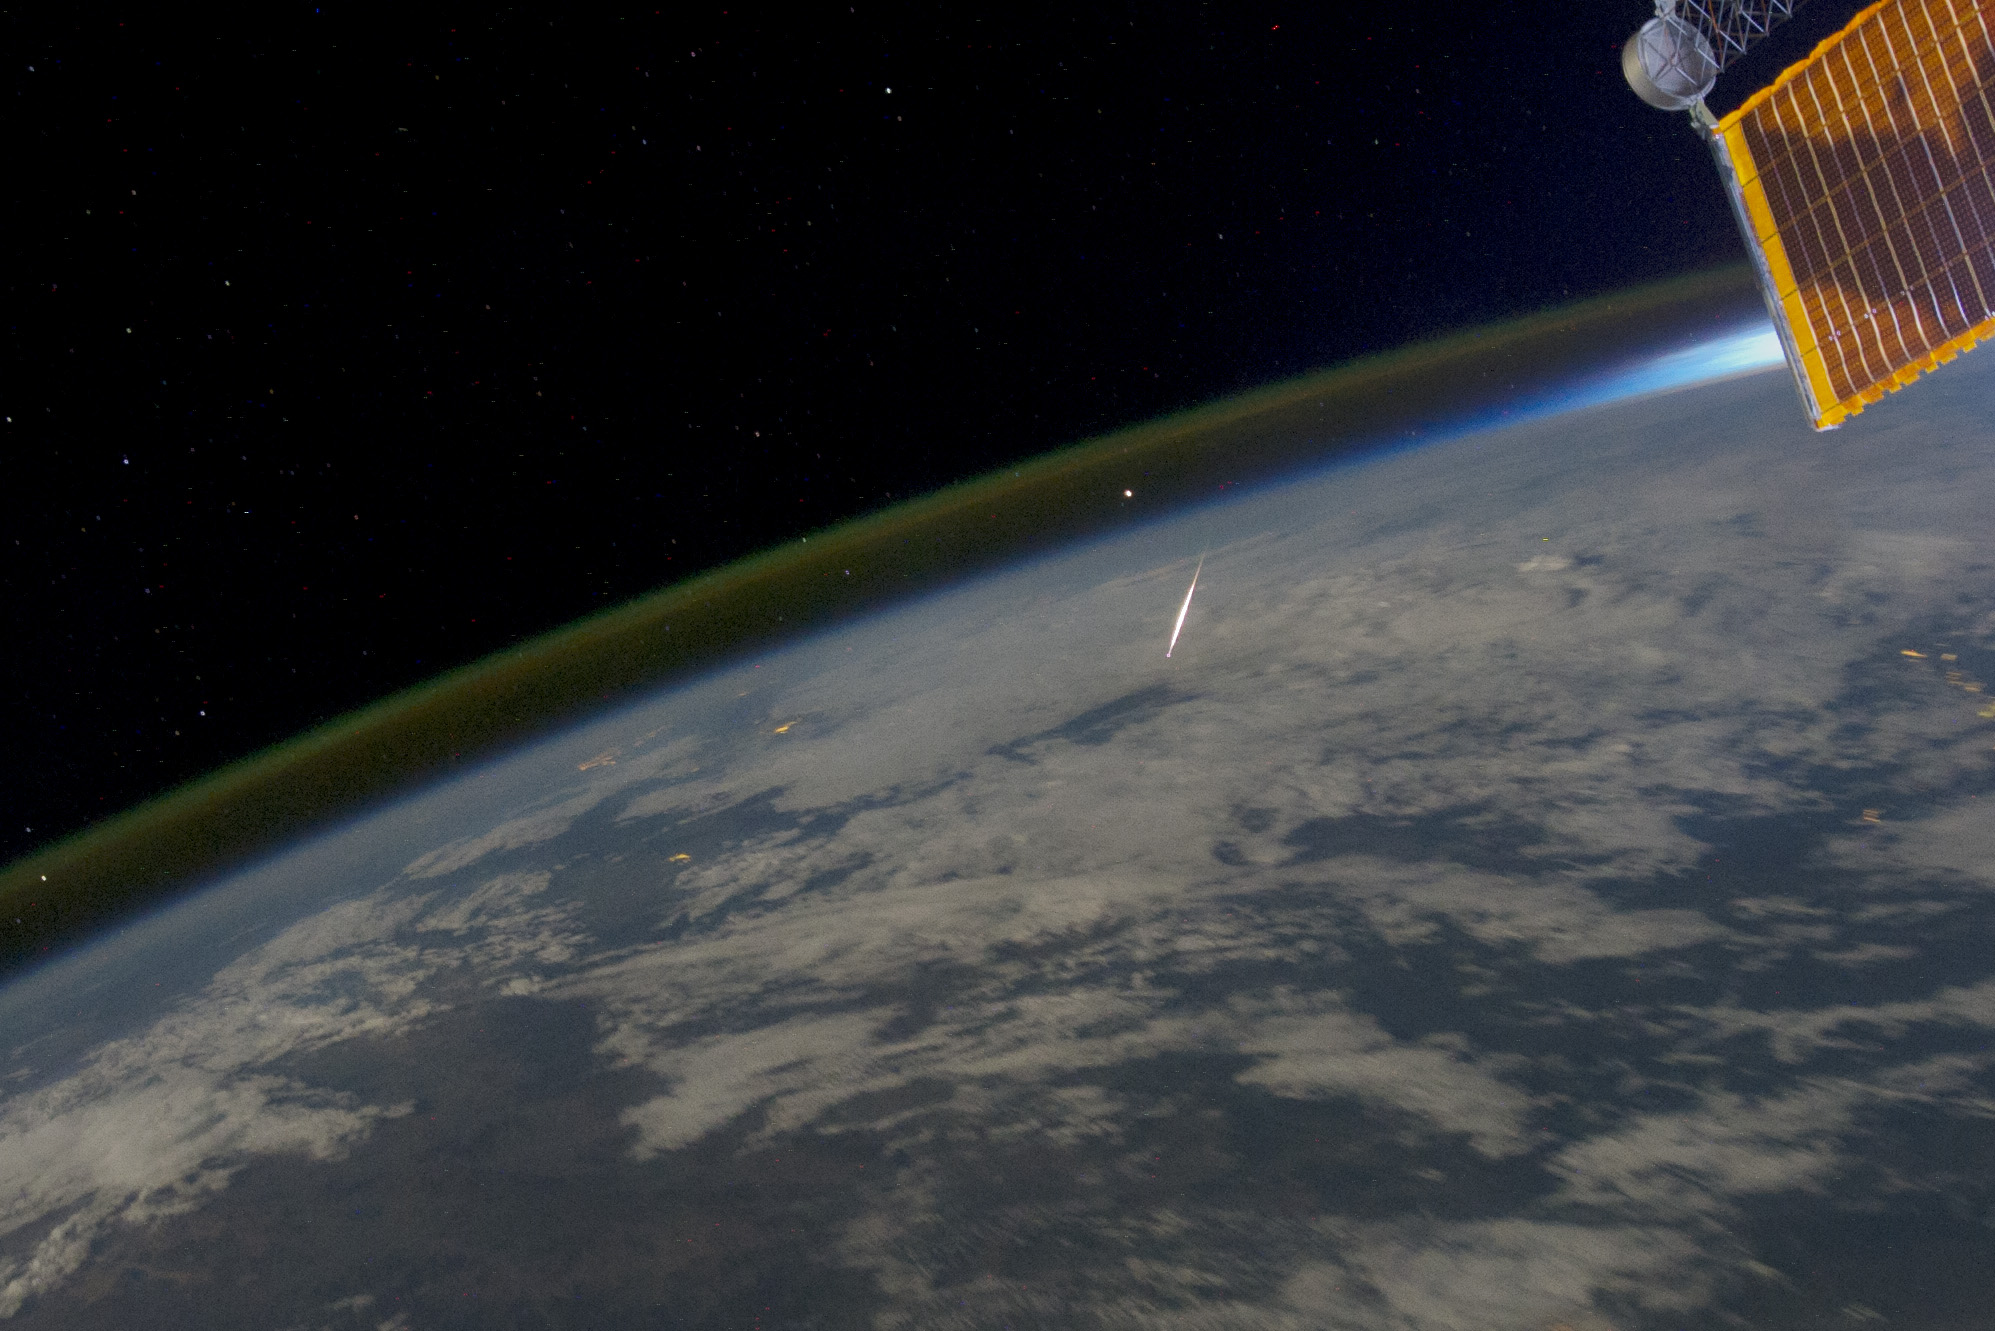 A rare photo of a meteor entering Earth's atmosphere as seen from the International Space Station.